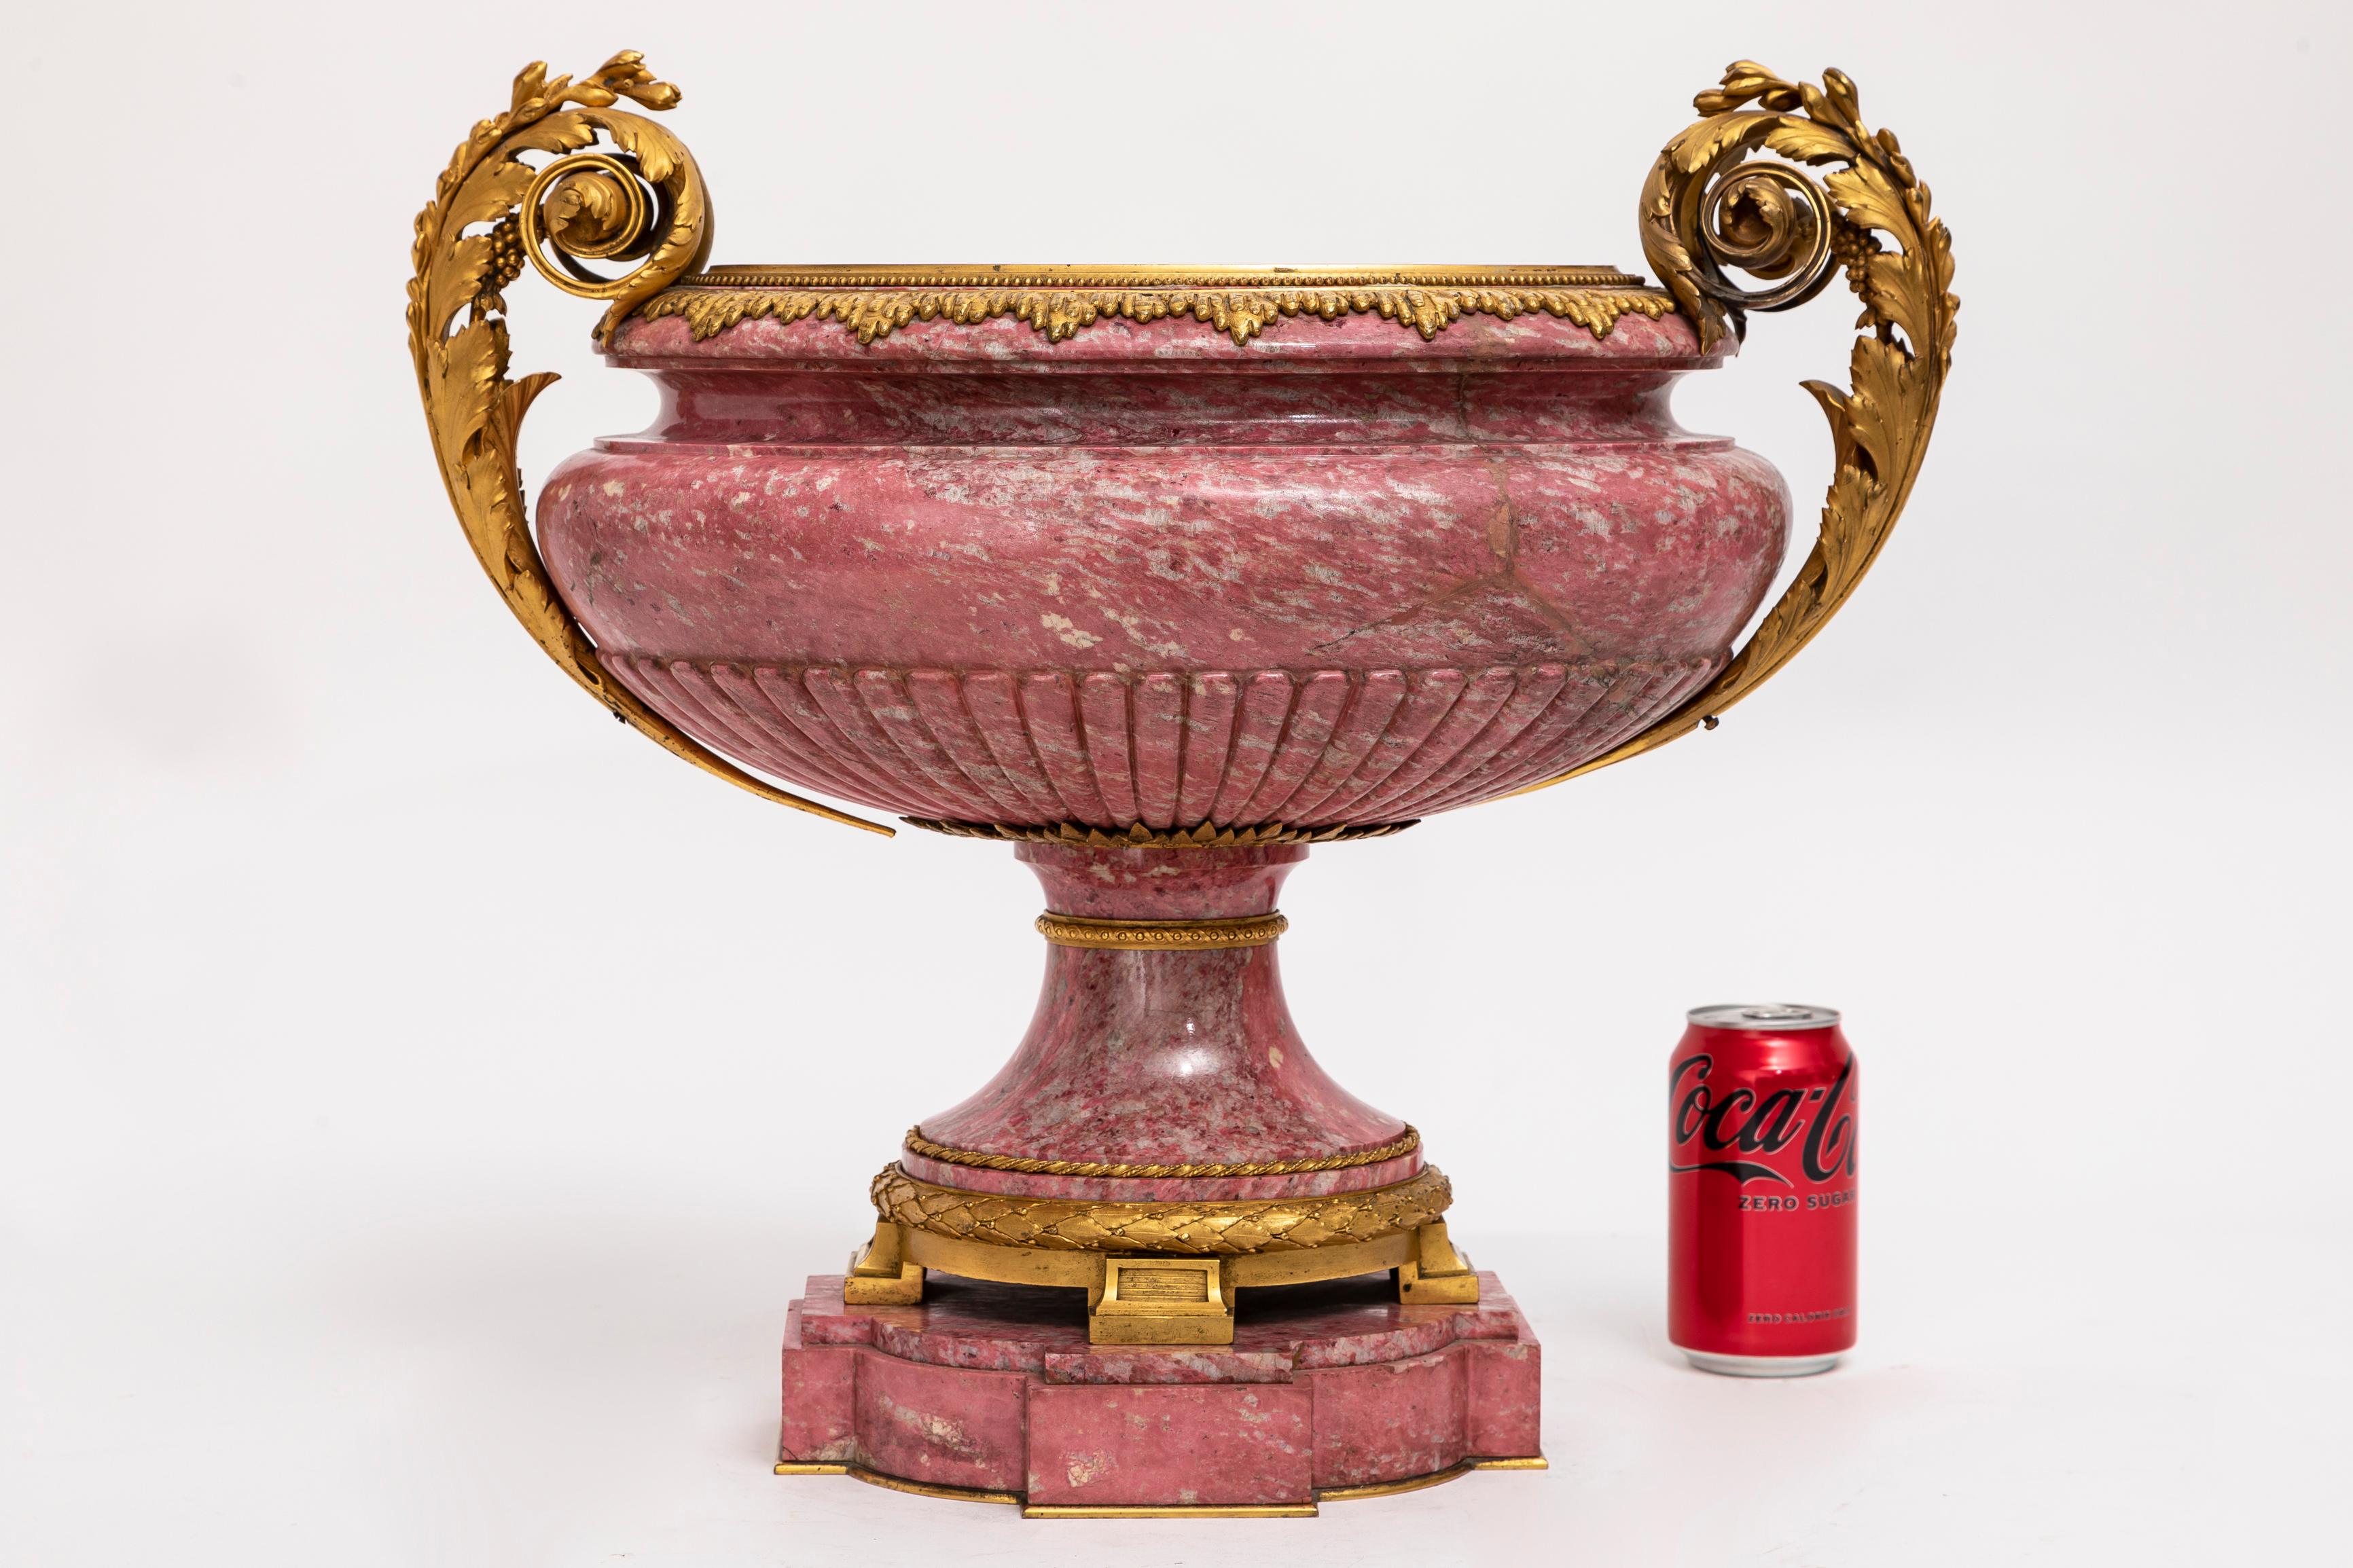 Mid-19th Century A 19th C. Russian Ormolu-Mounted Hand-Carved Pink Rhodonite Tazza/Centerpiece For Sale